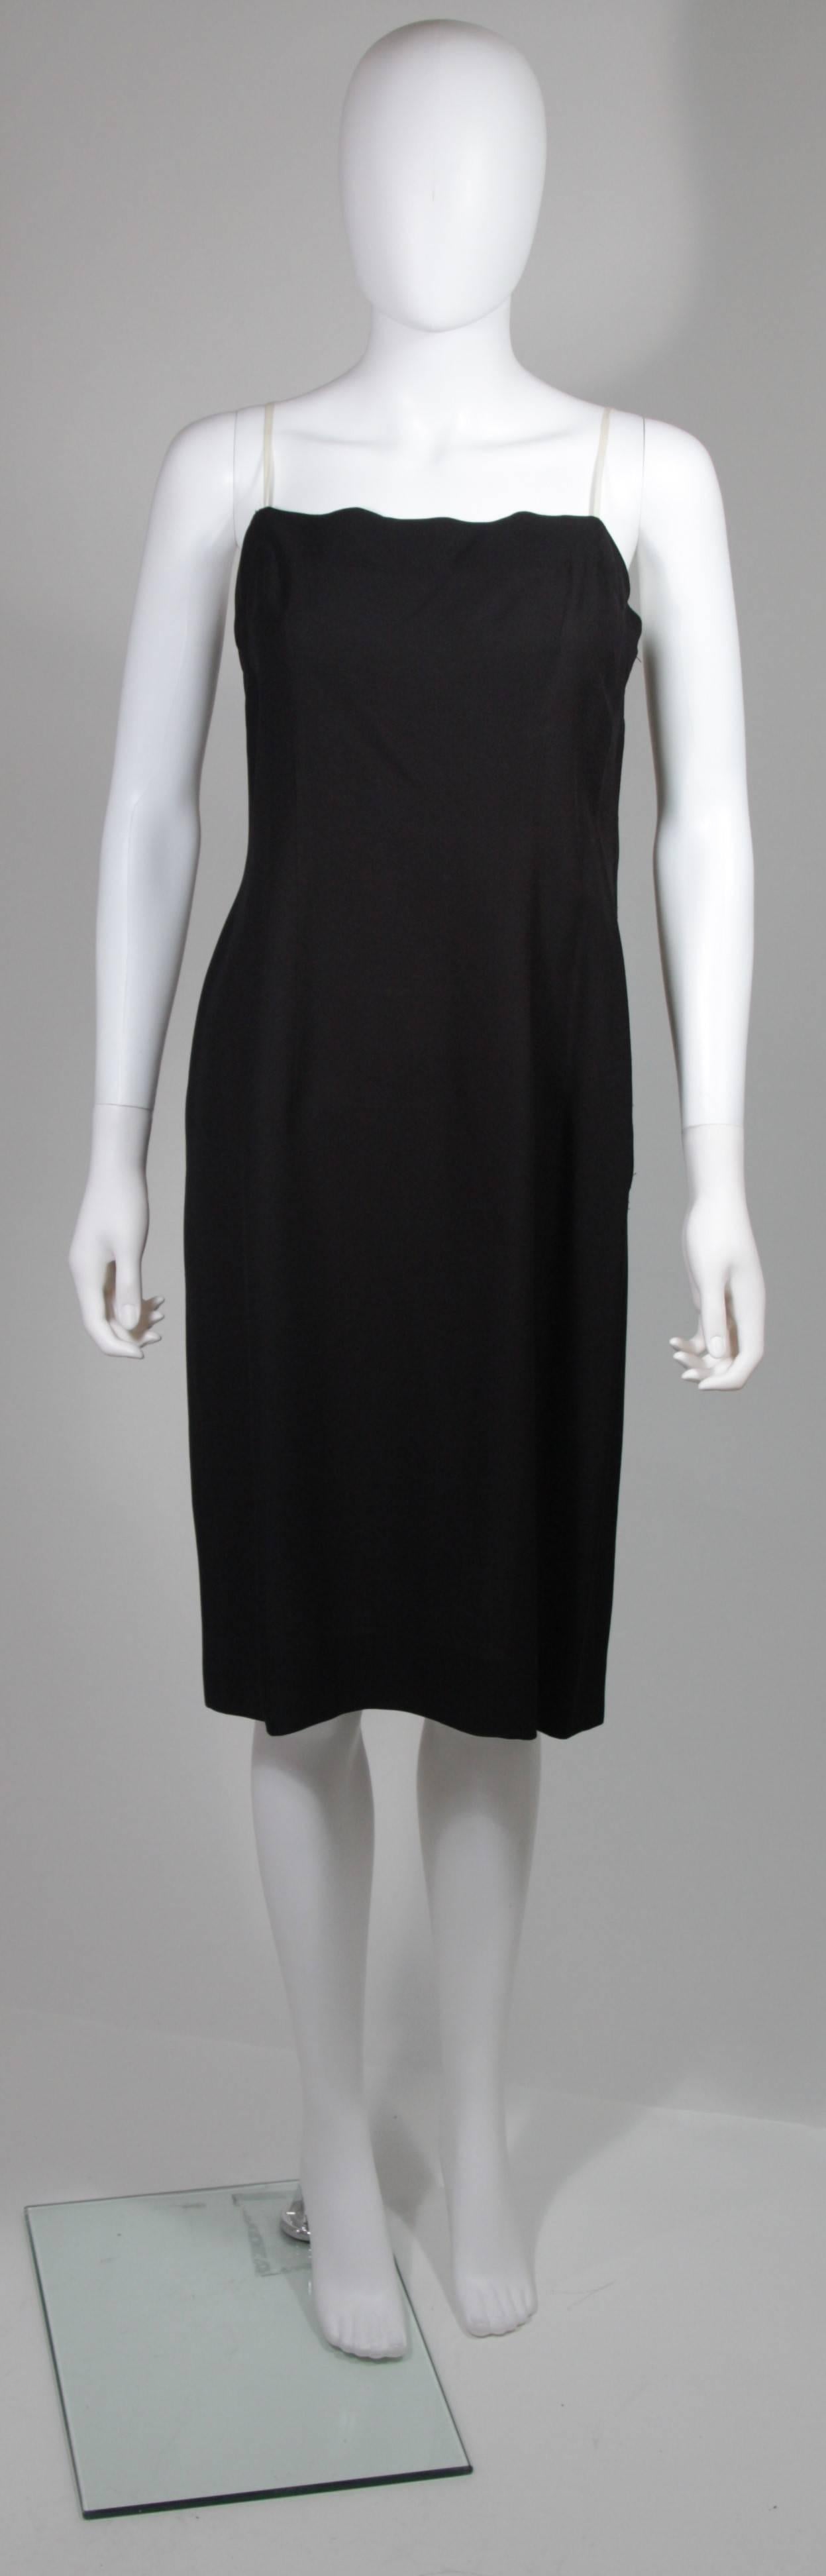 Jean Desses Black Chiffon and Velvet Draped Cocktail Dress Size Small For Sale 2